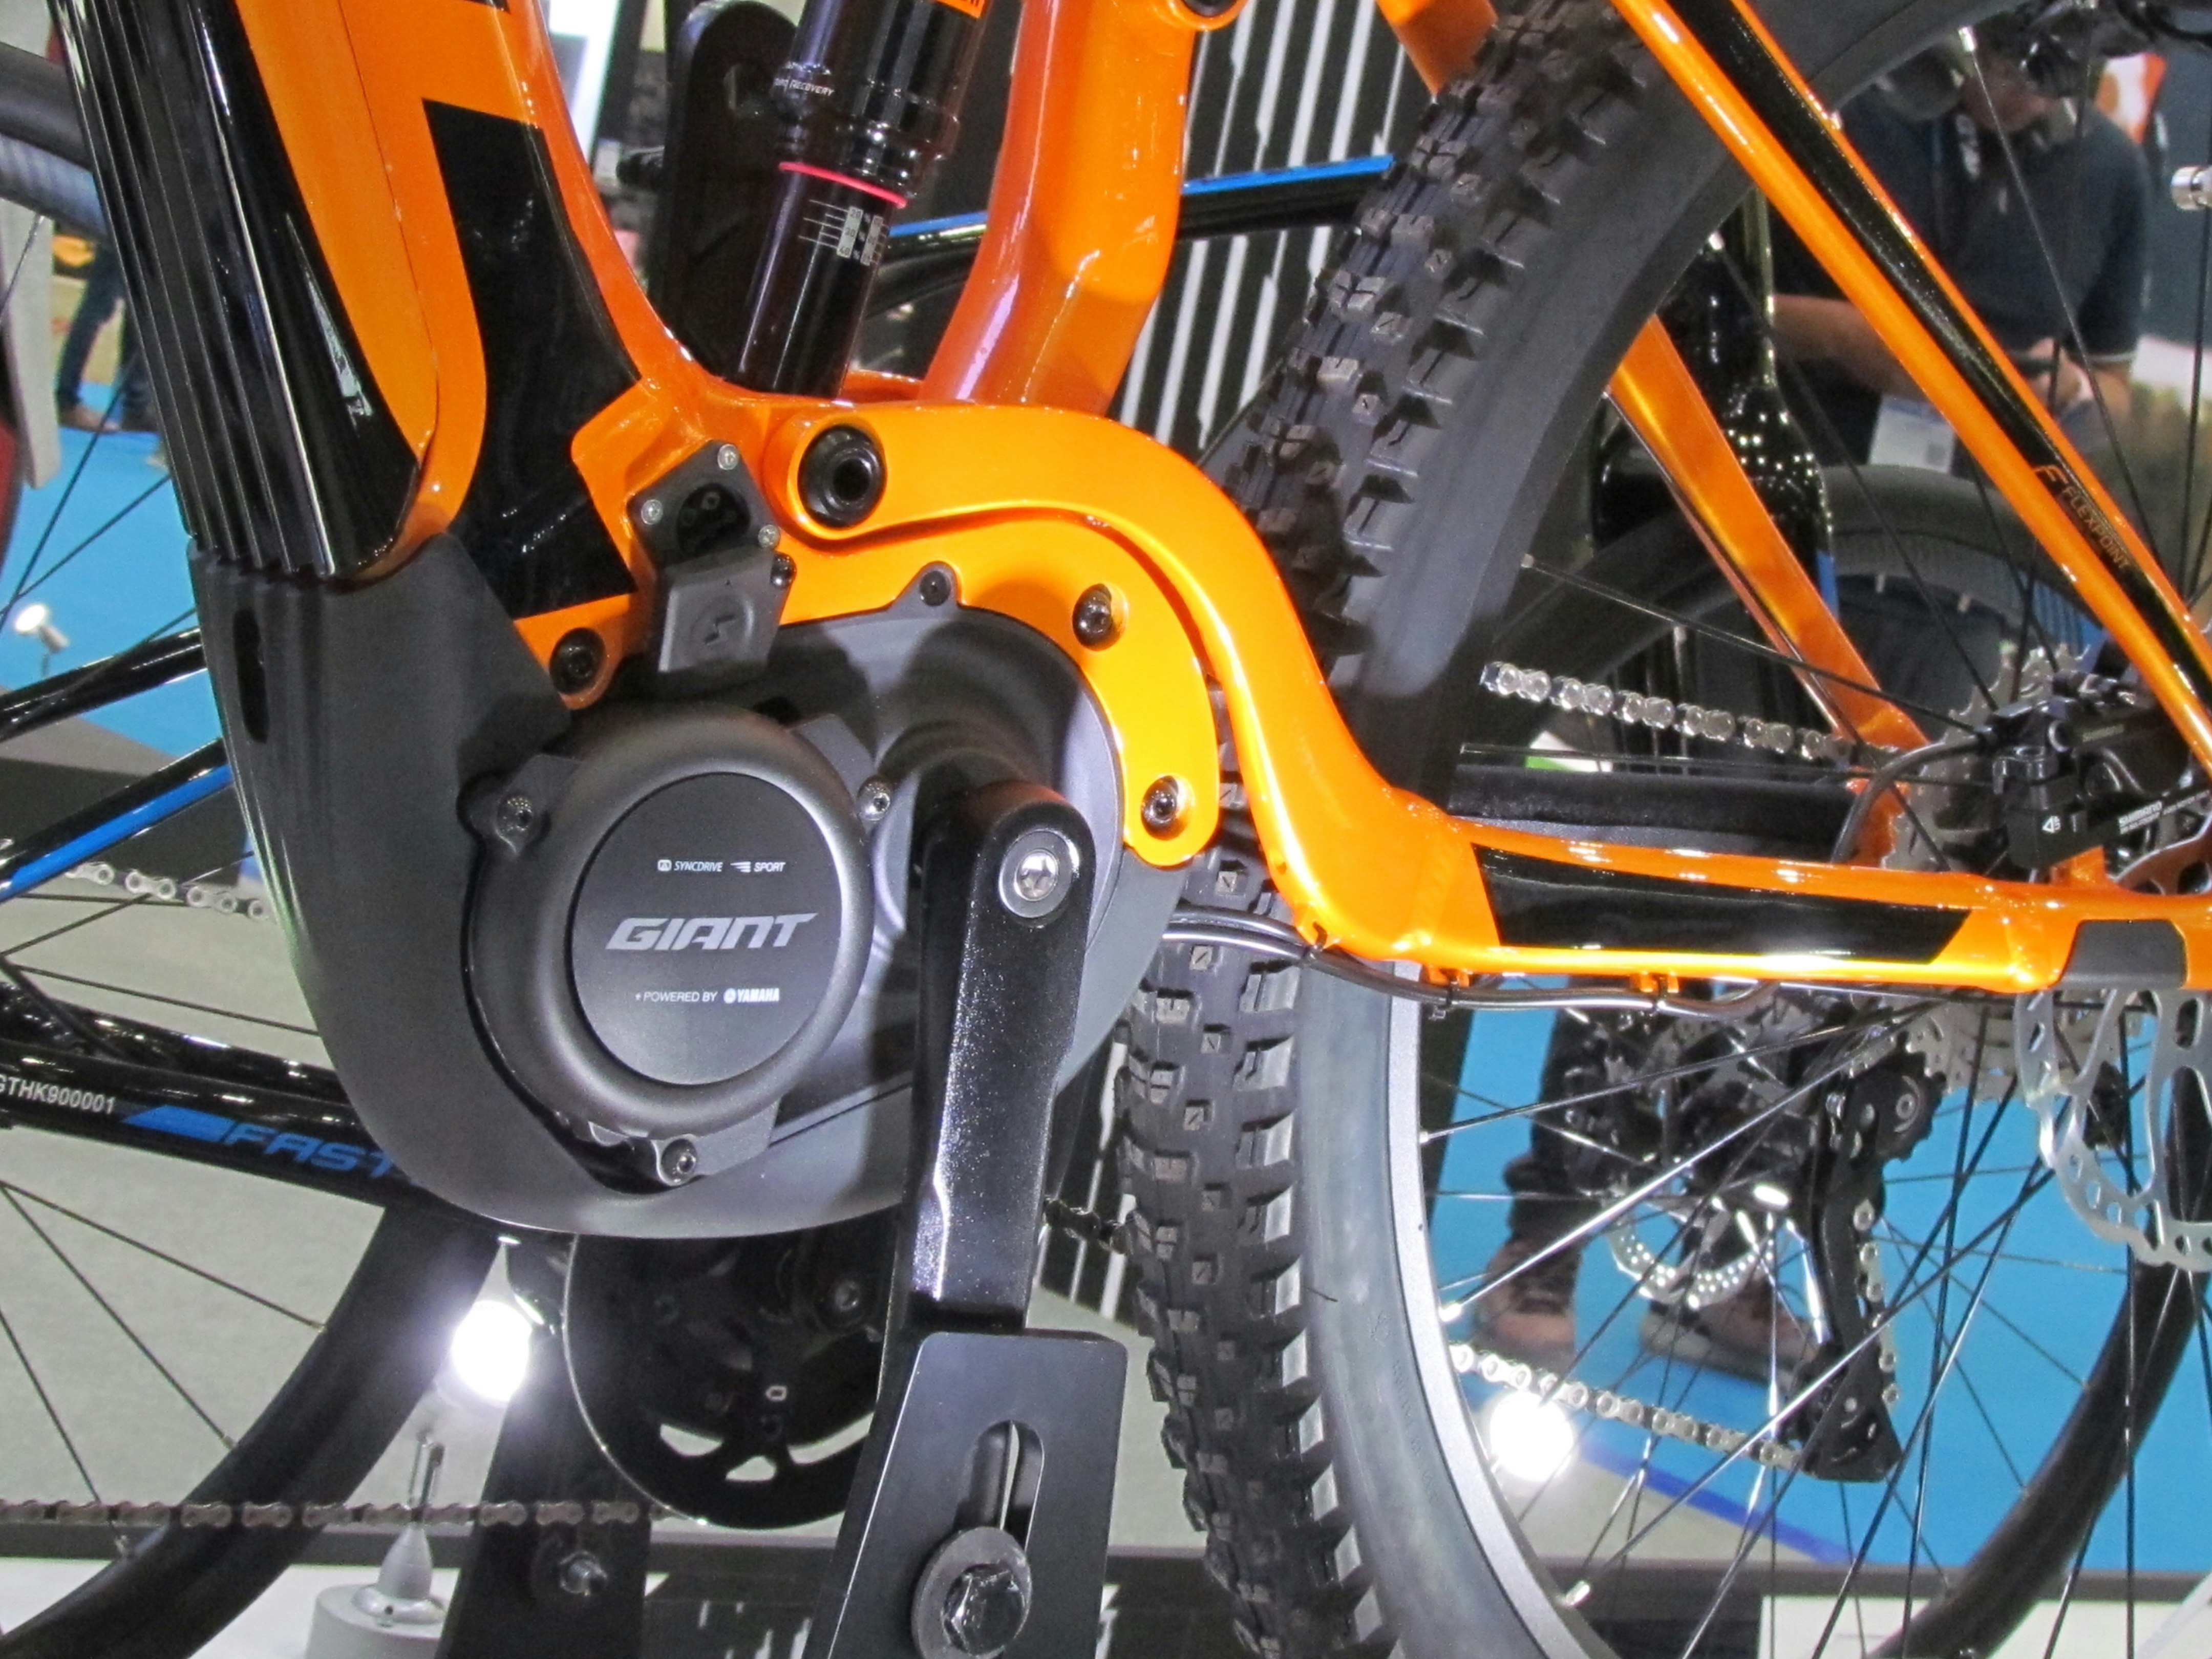 Giant To Sell 600,000 E-Bikes This Year